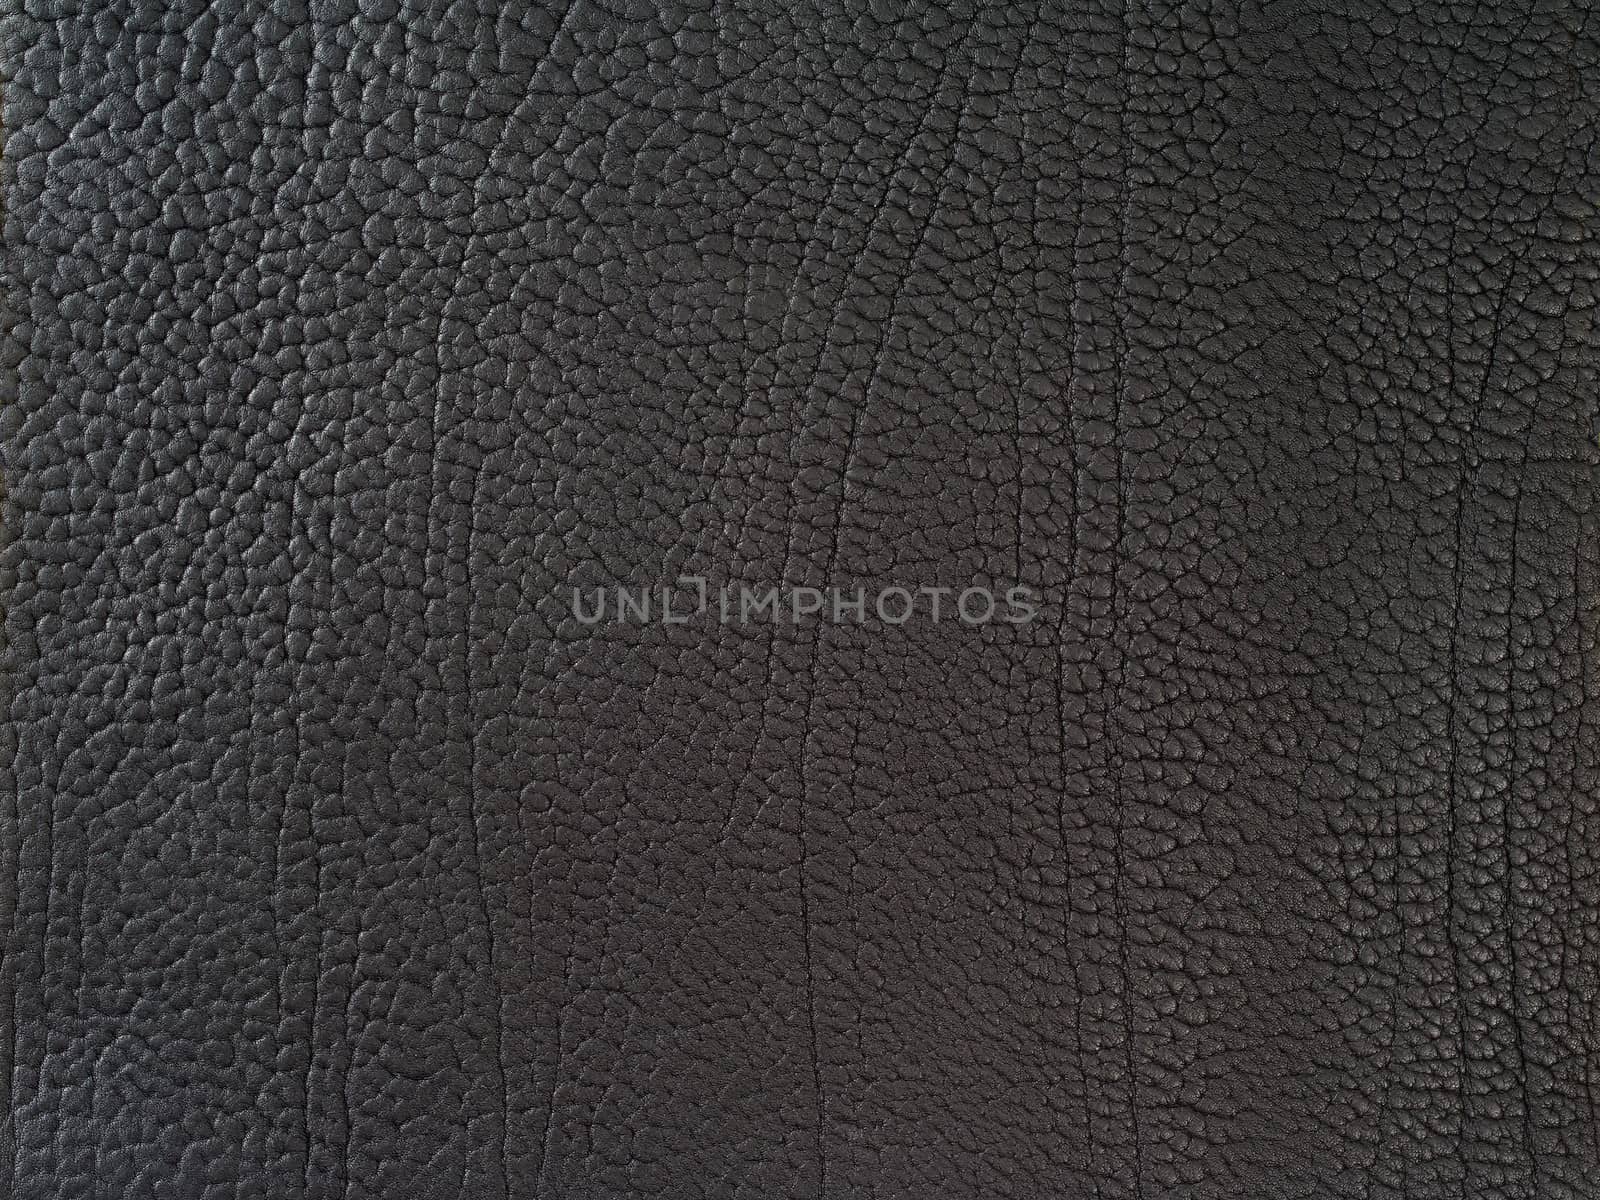 Closeup photo of black leather as a background.